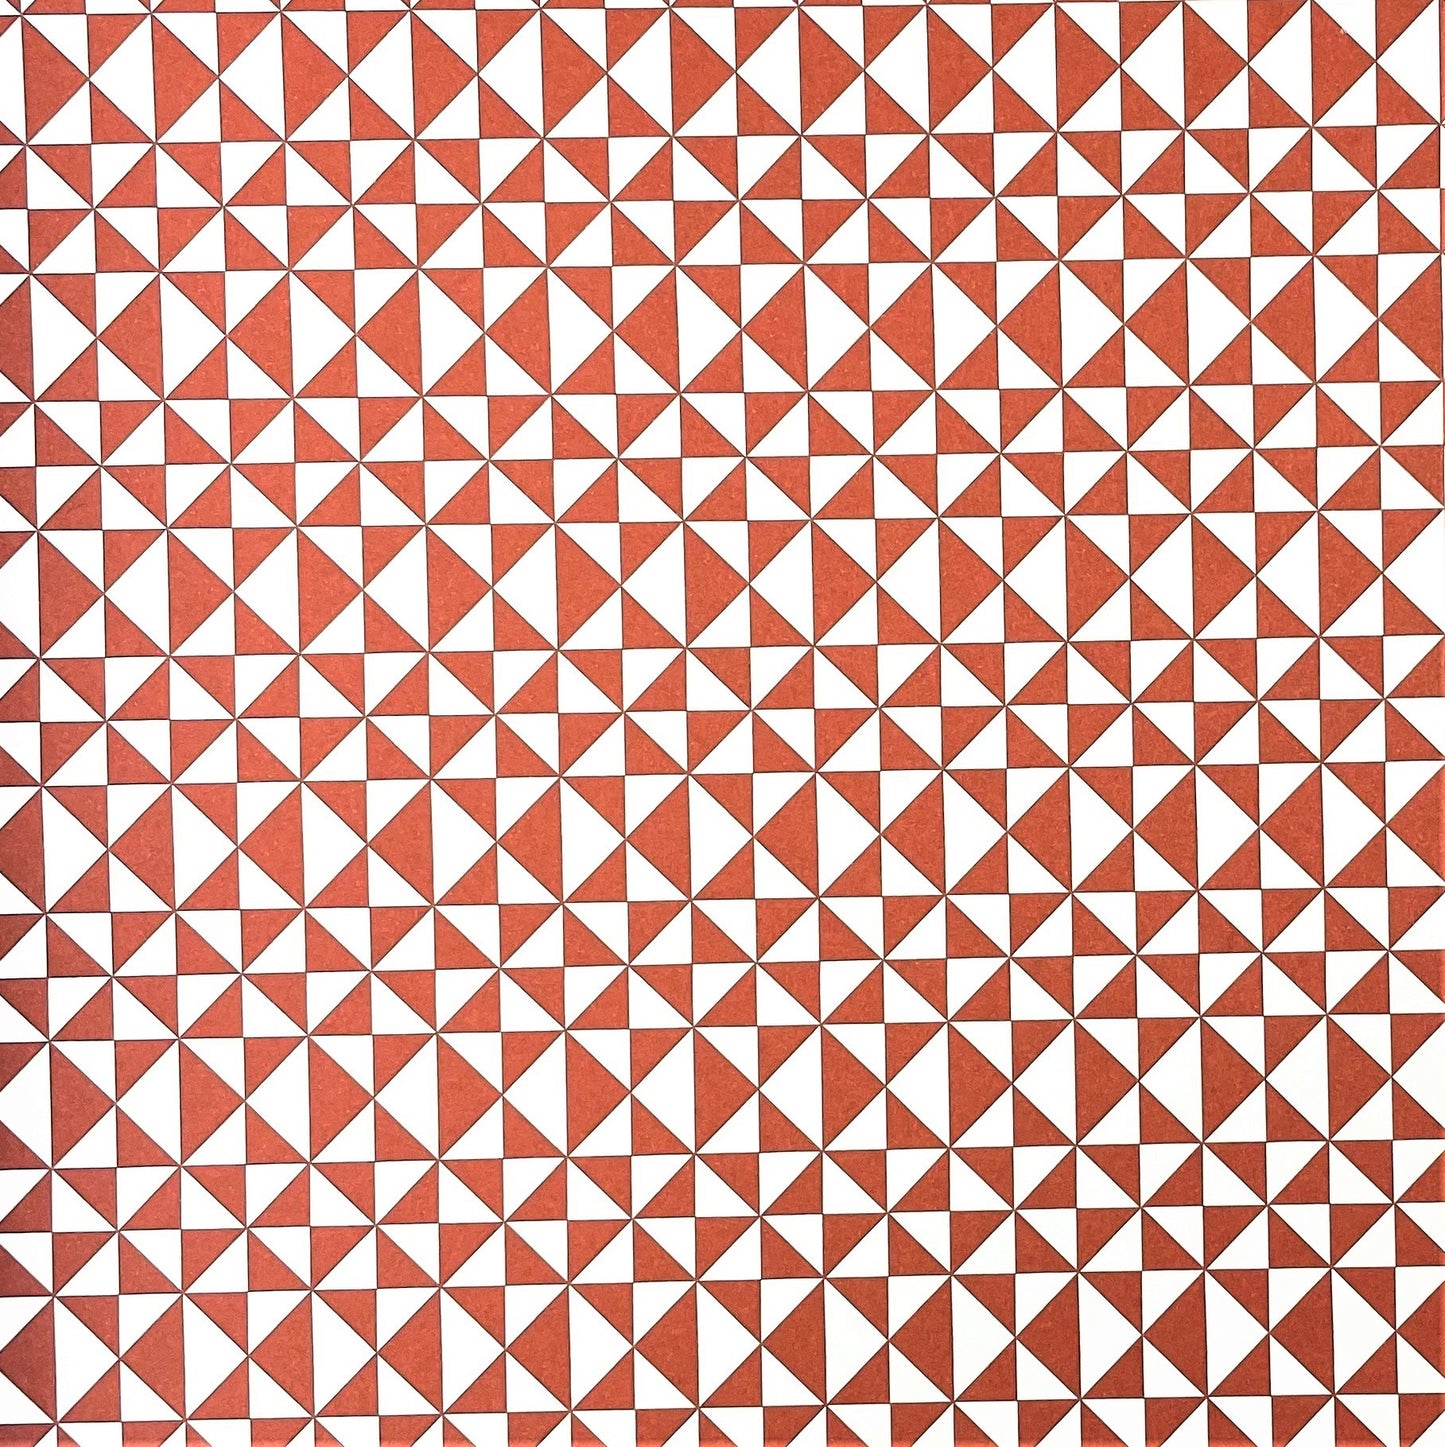 wrapping paper with an abstract triangle pattern in brick red and white by Ola Studio